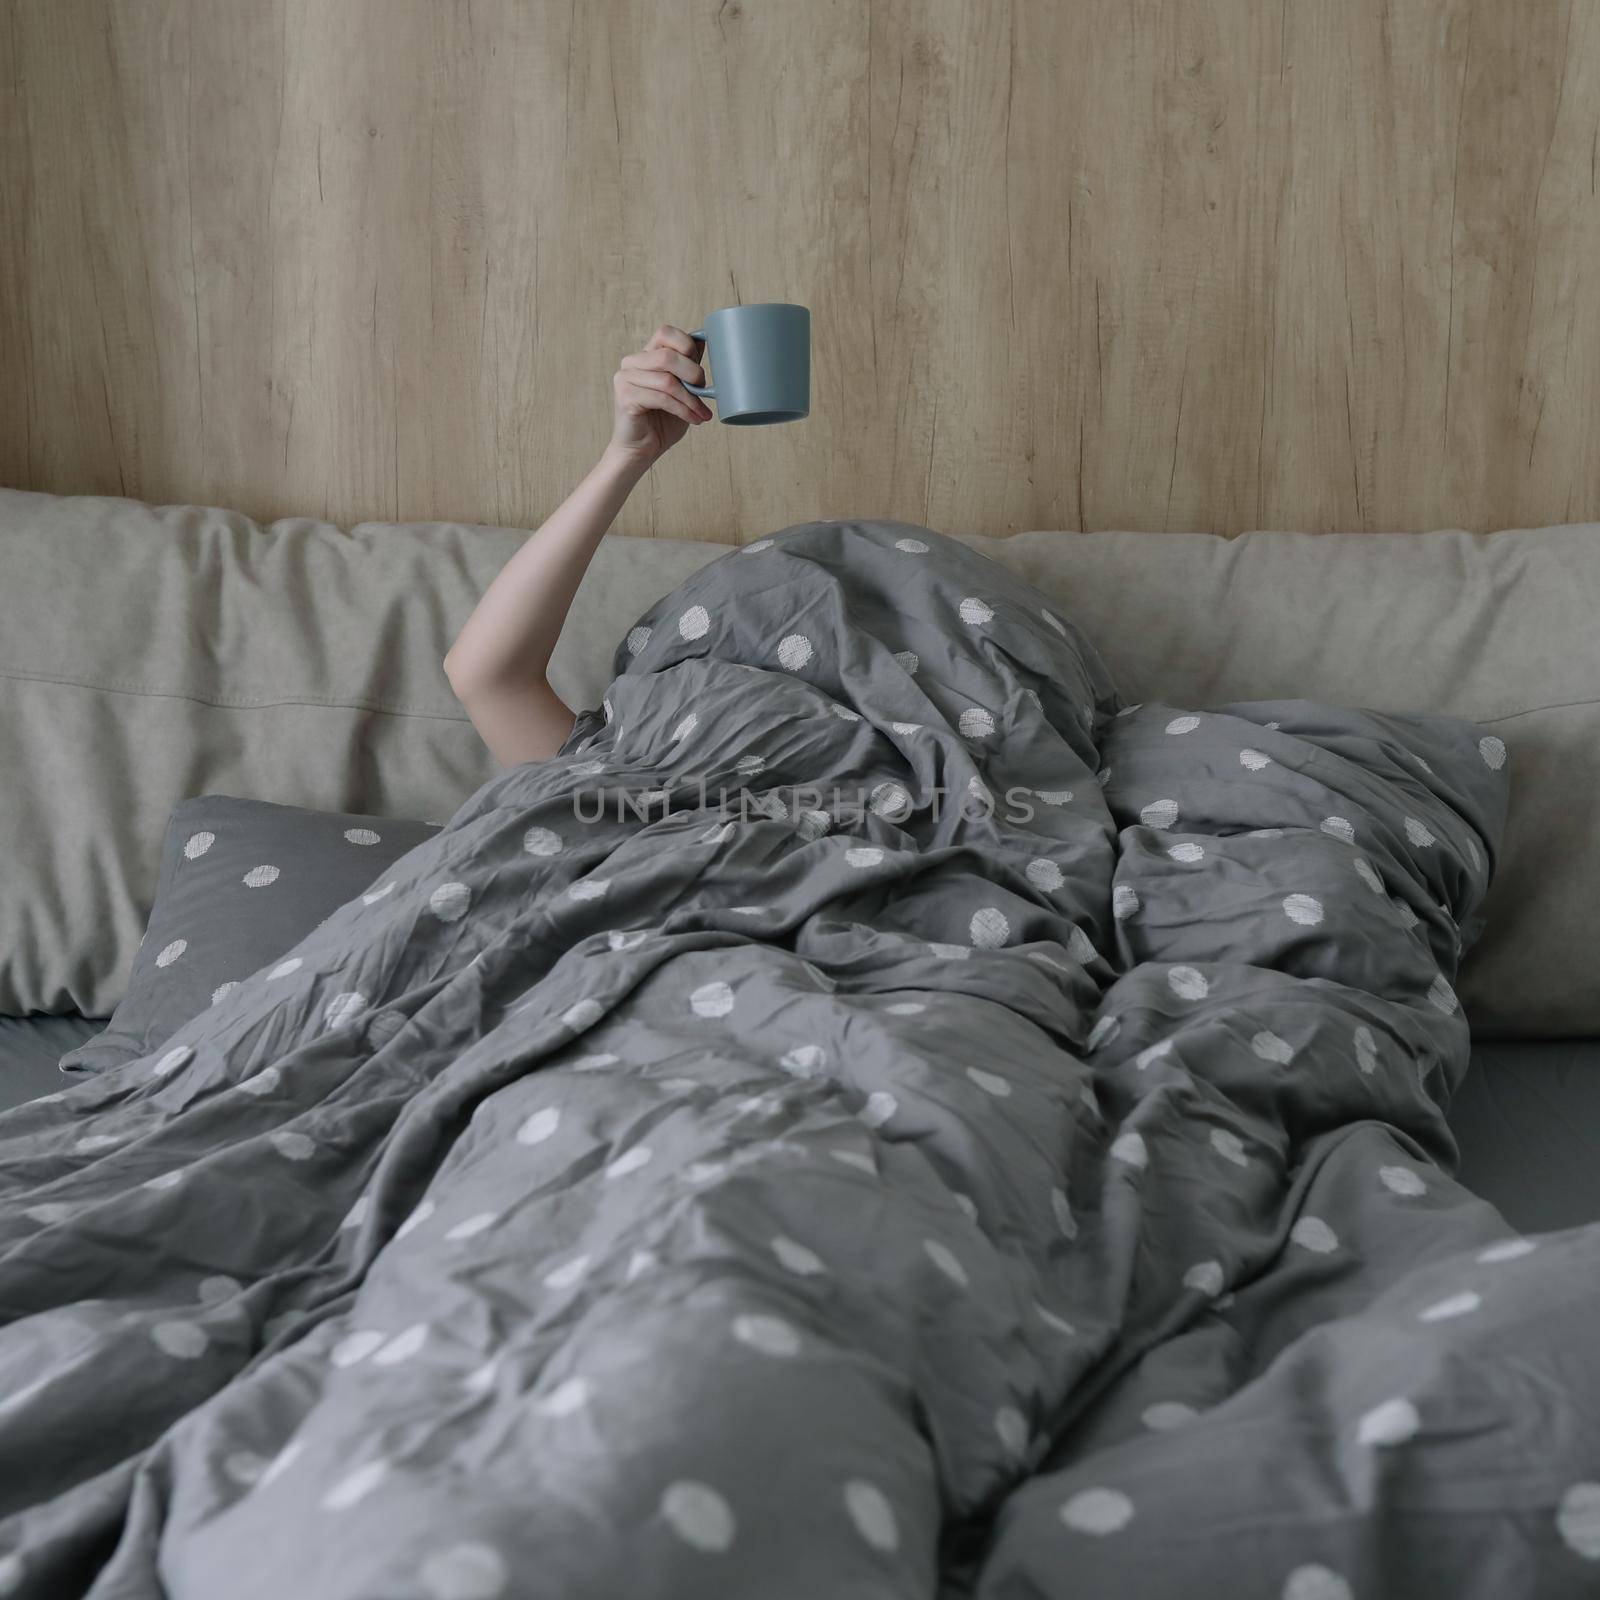 morning, coziness, cozy home concept - a hand with cup of coffee or tea in bed at home by paralisart